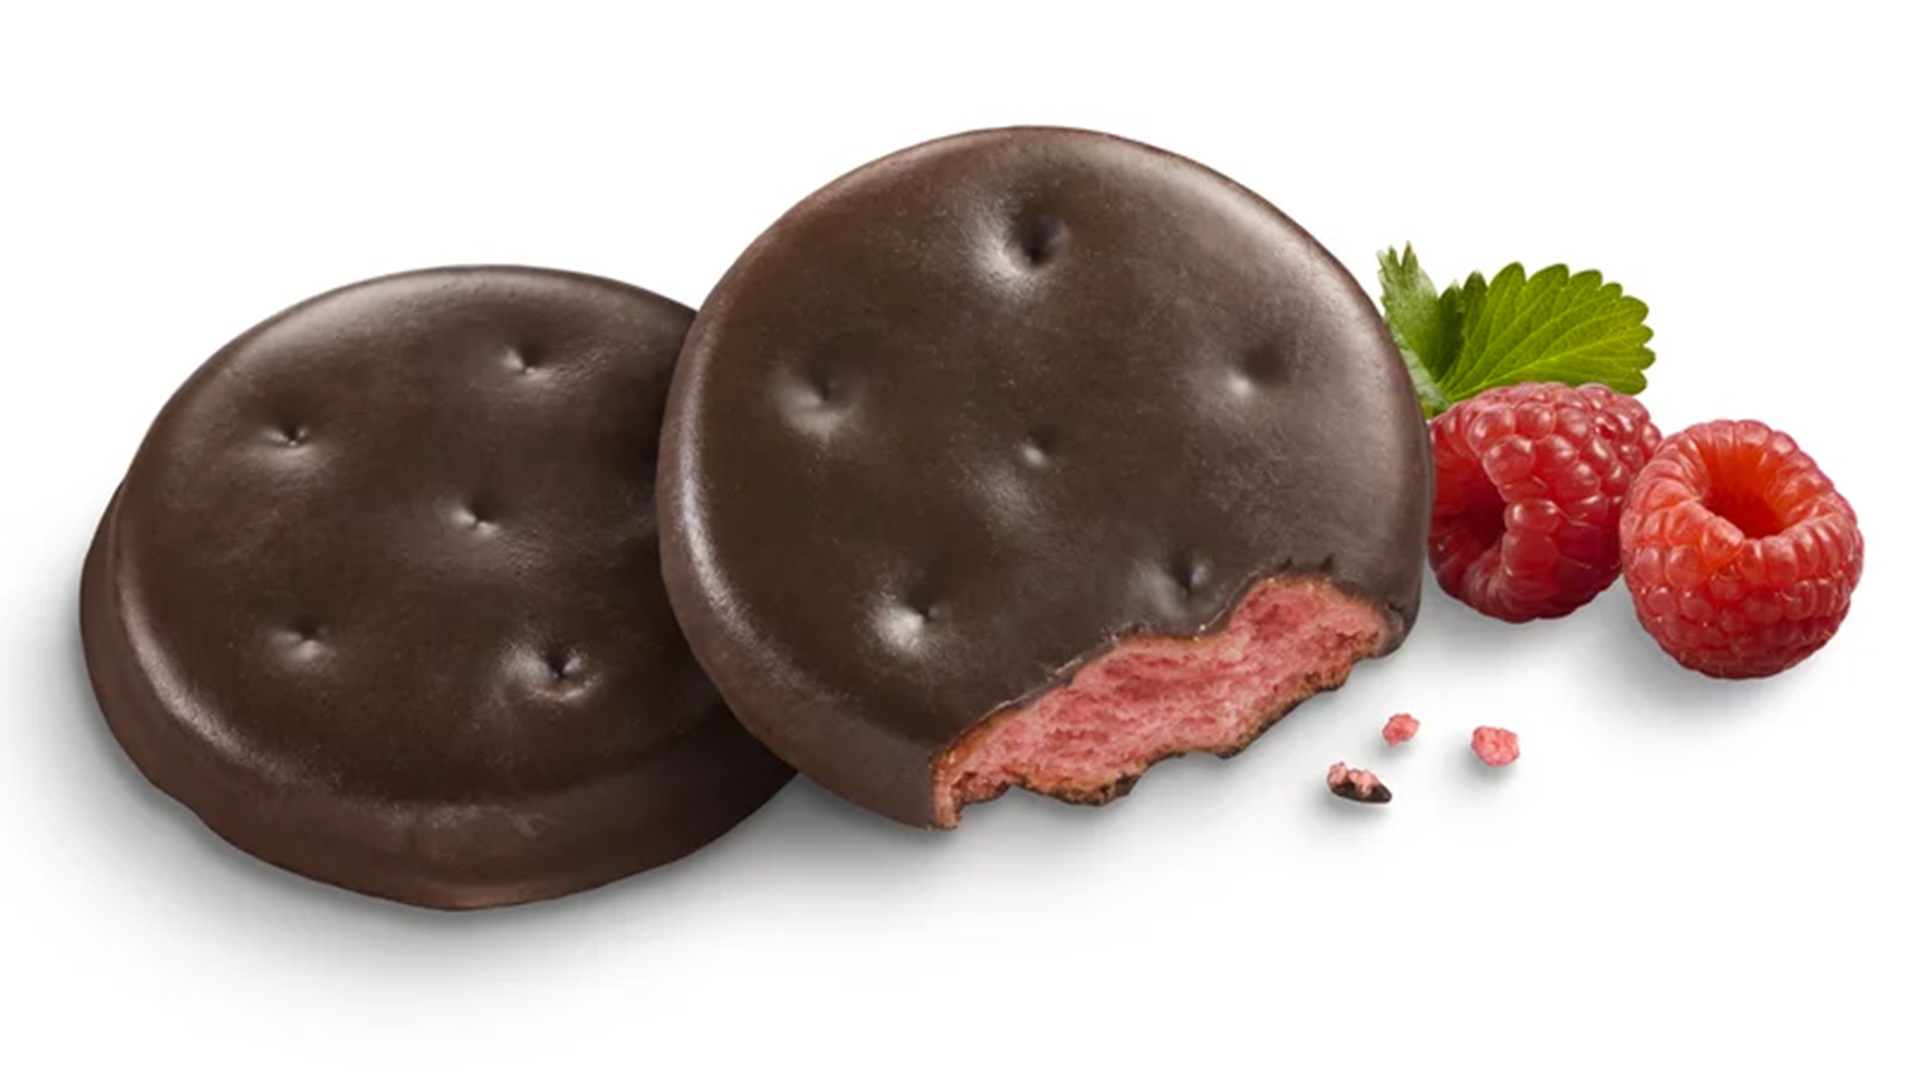 The Girl Scouts website calls Raspberry Rally a "thin, crispy cookie infused with raspberry flavor and dipped in chocolaty coating."